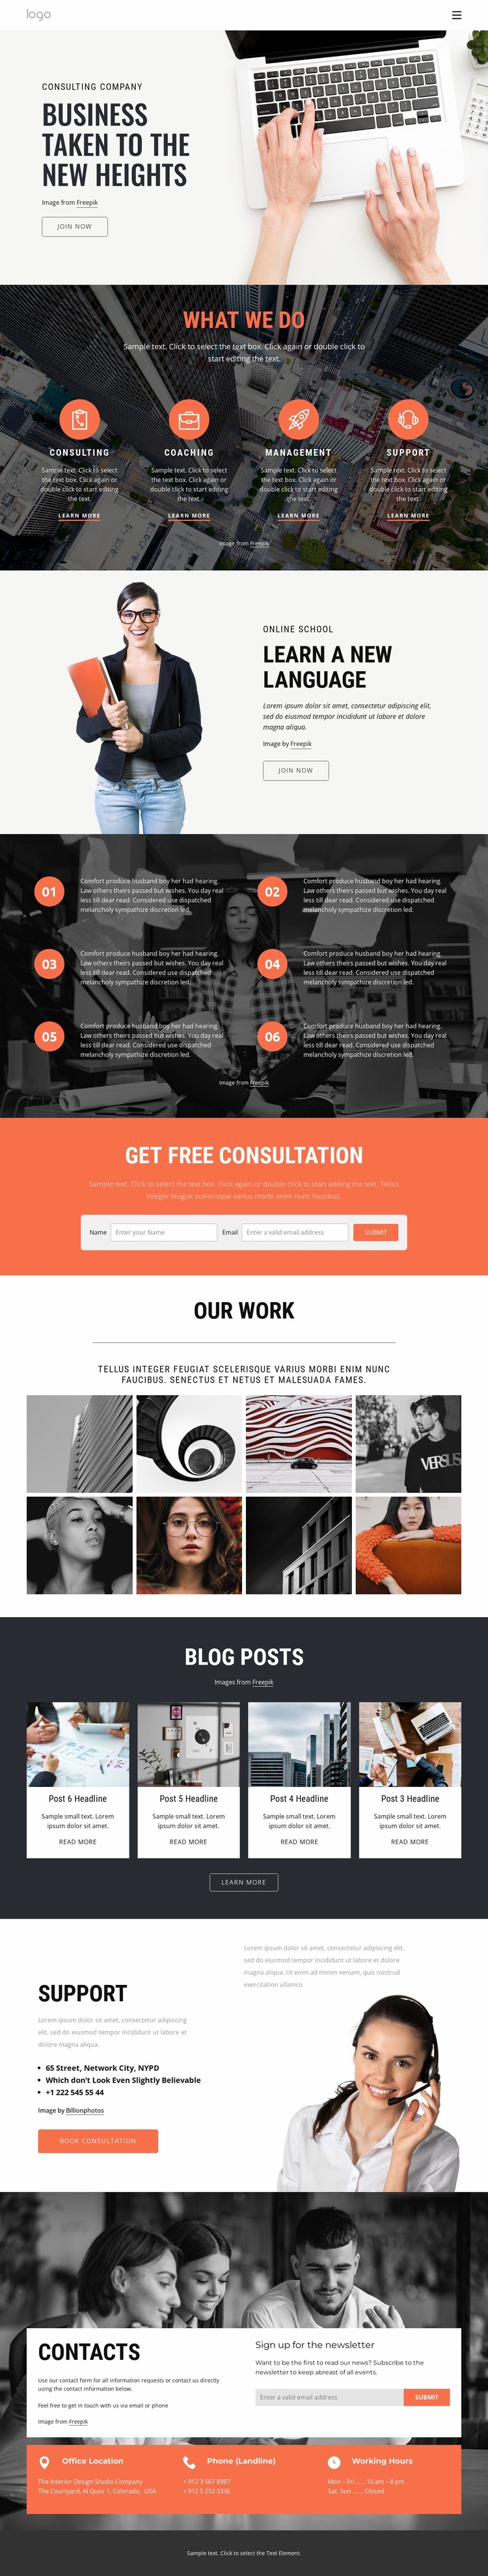 How consulting helps to speed up success Website Design